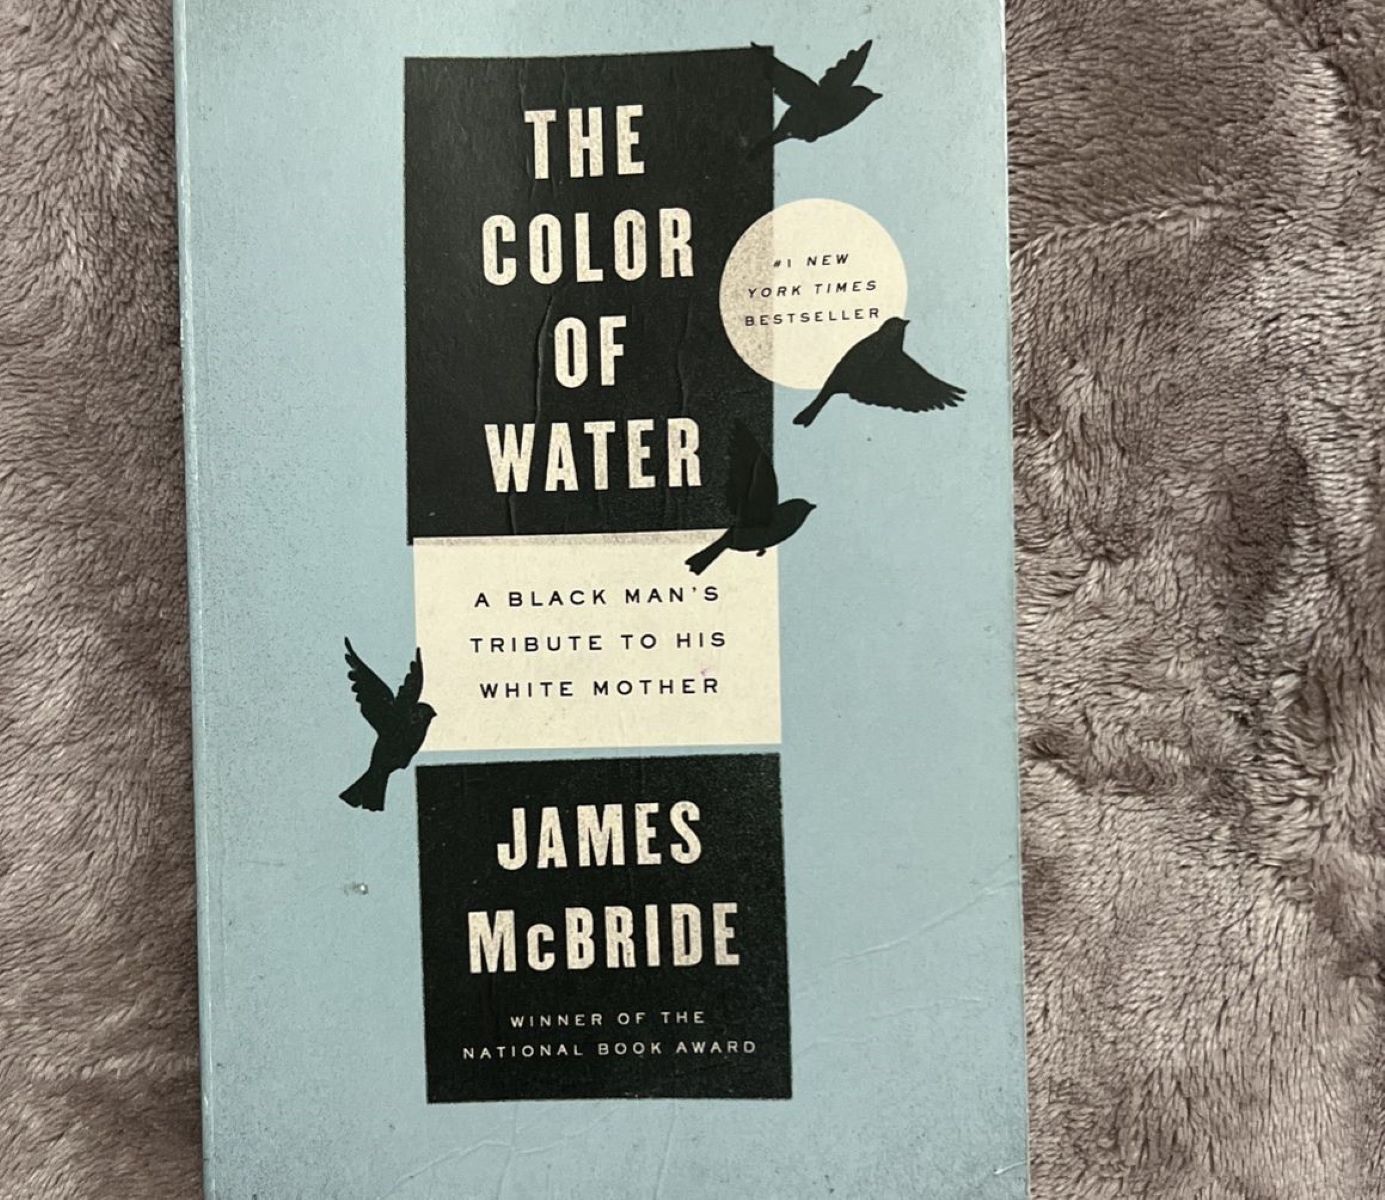 13-unbelievable-facts-about-the-color-of-water-james-mcbride